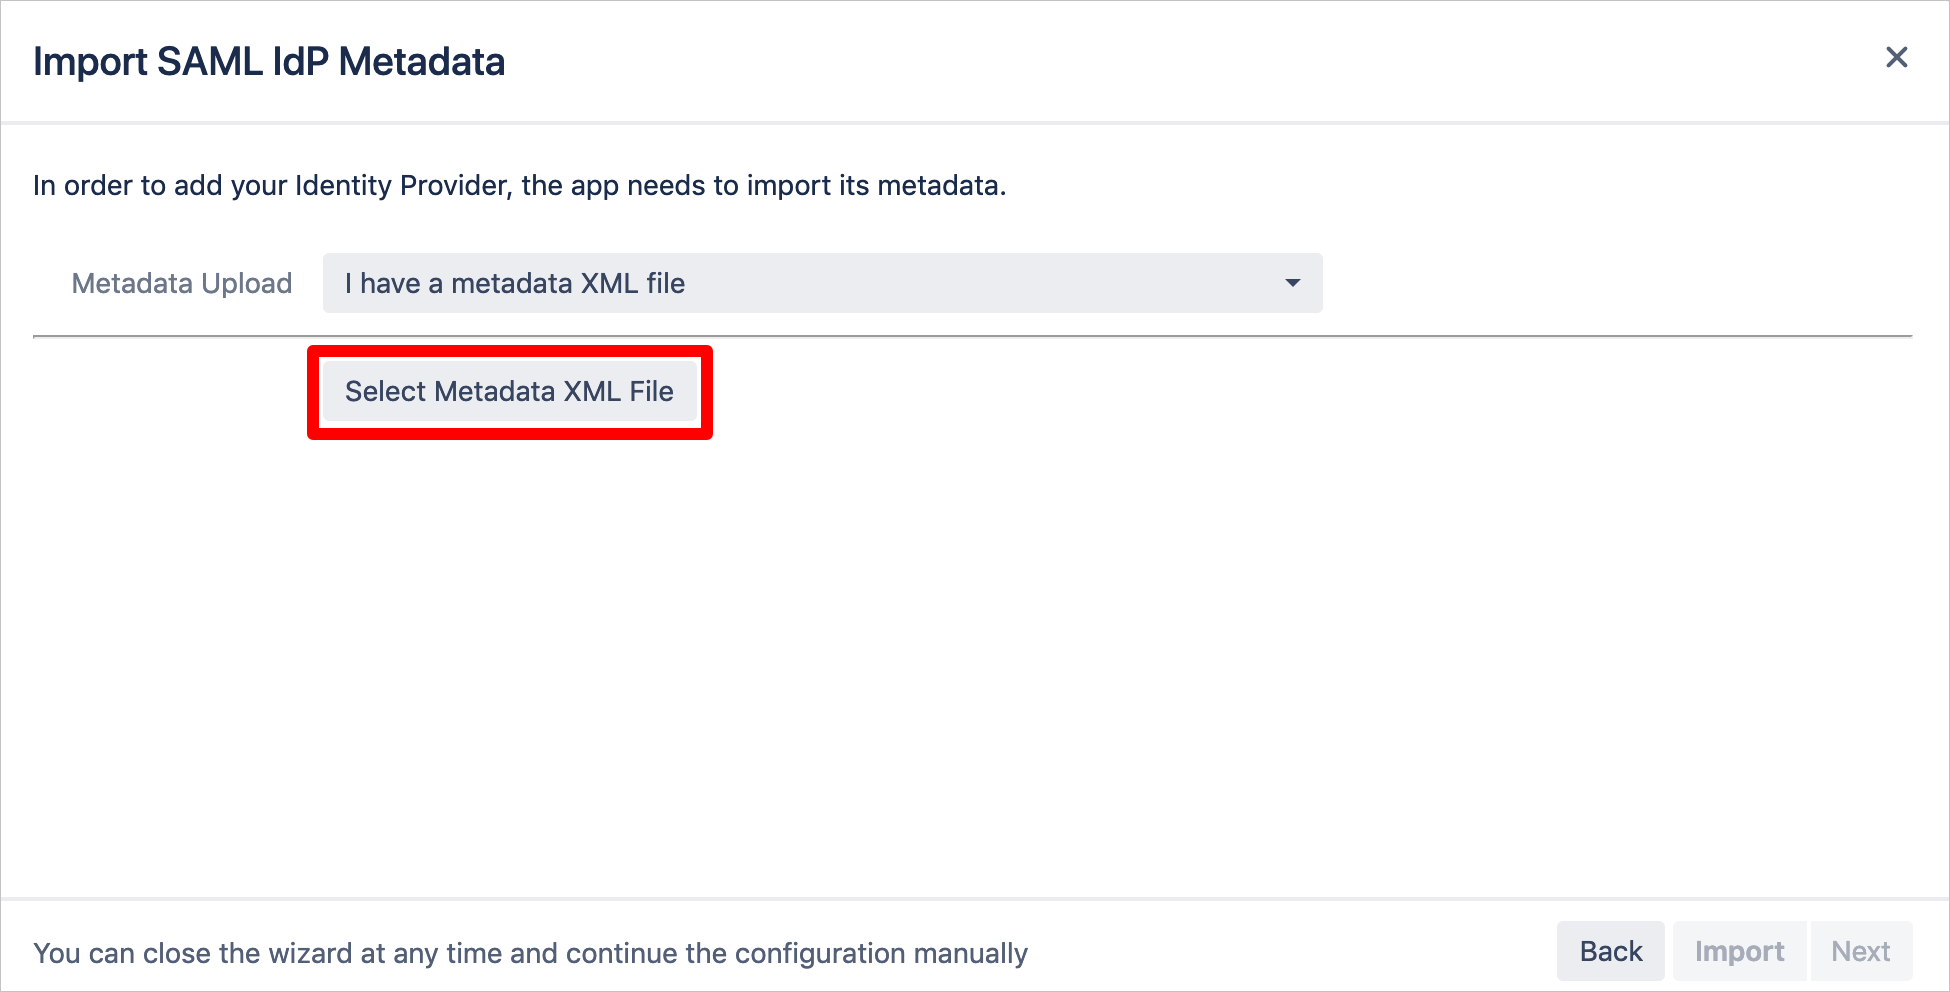 Screenshot that shows the "Import S A M L I d P Metadata" page with the "Select Metadata X M L File" action selected.